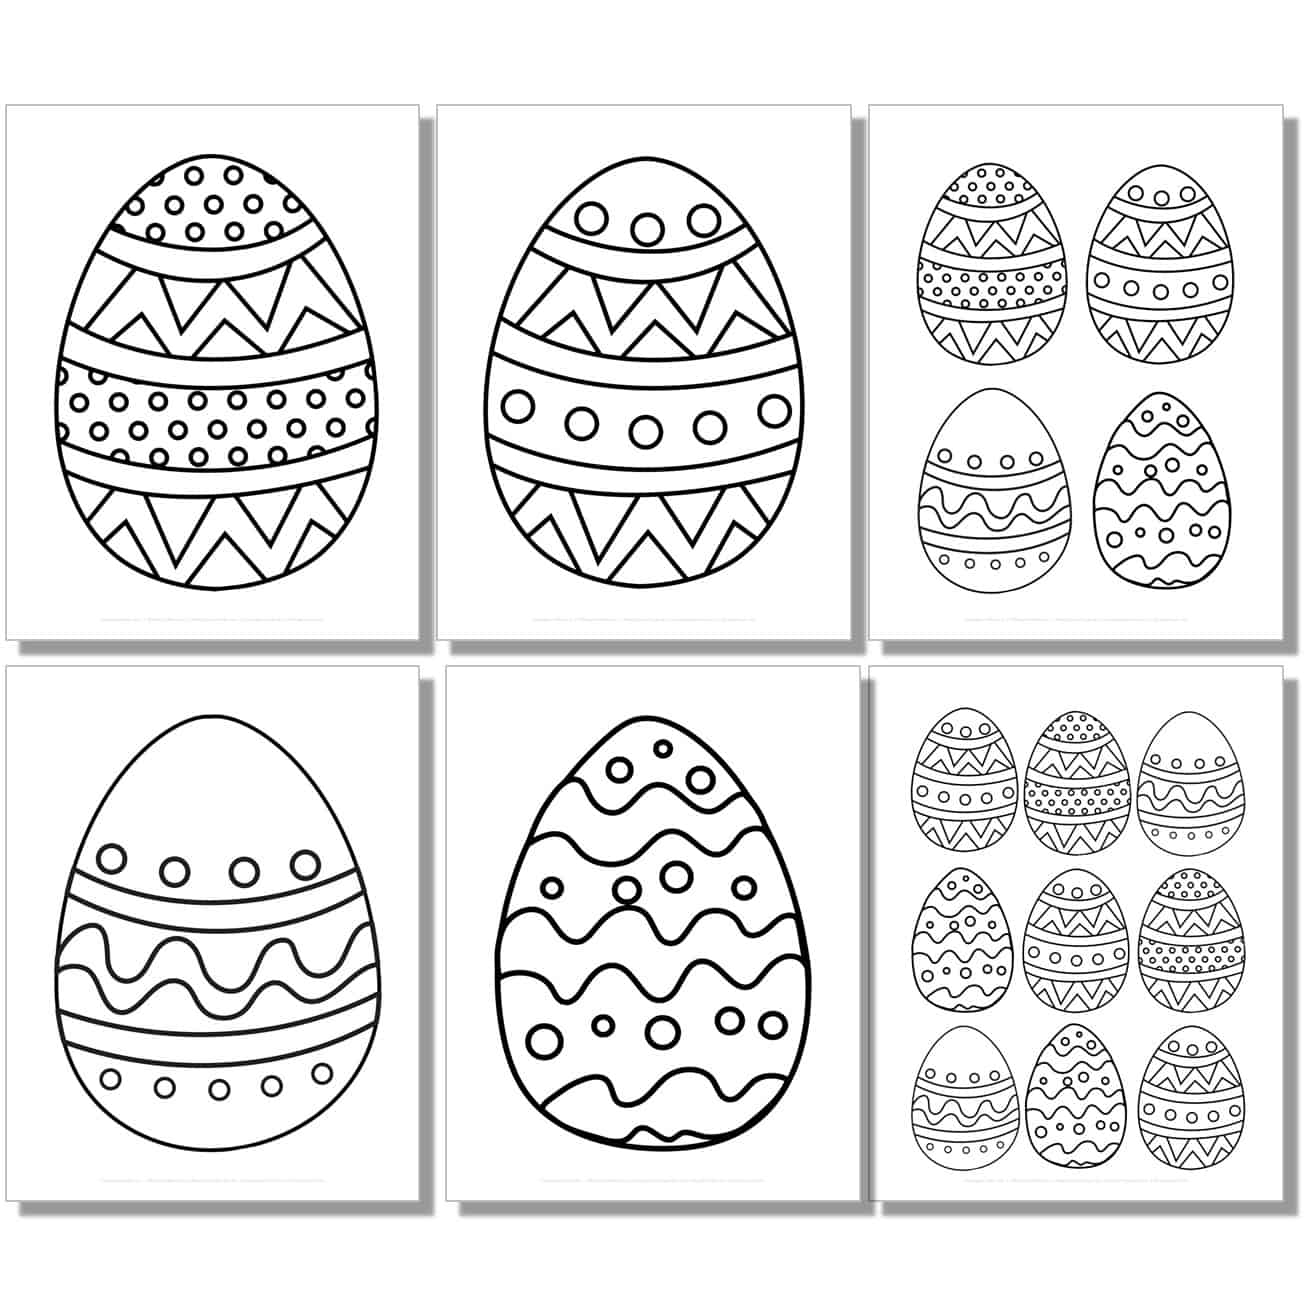 large, medium, small detailed patterned easter egg templates, outlines, stencils.